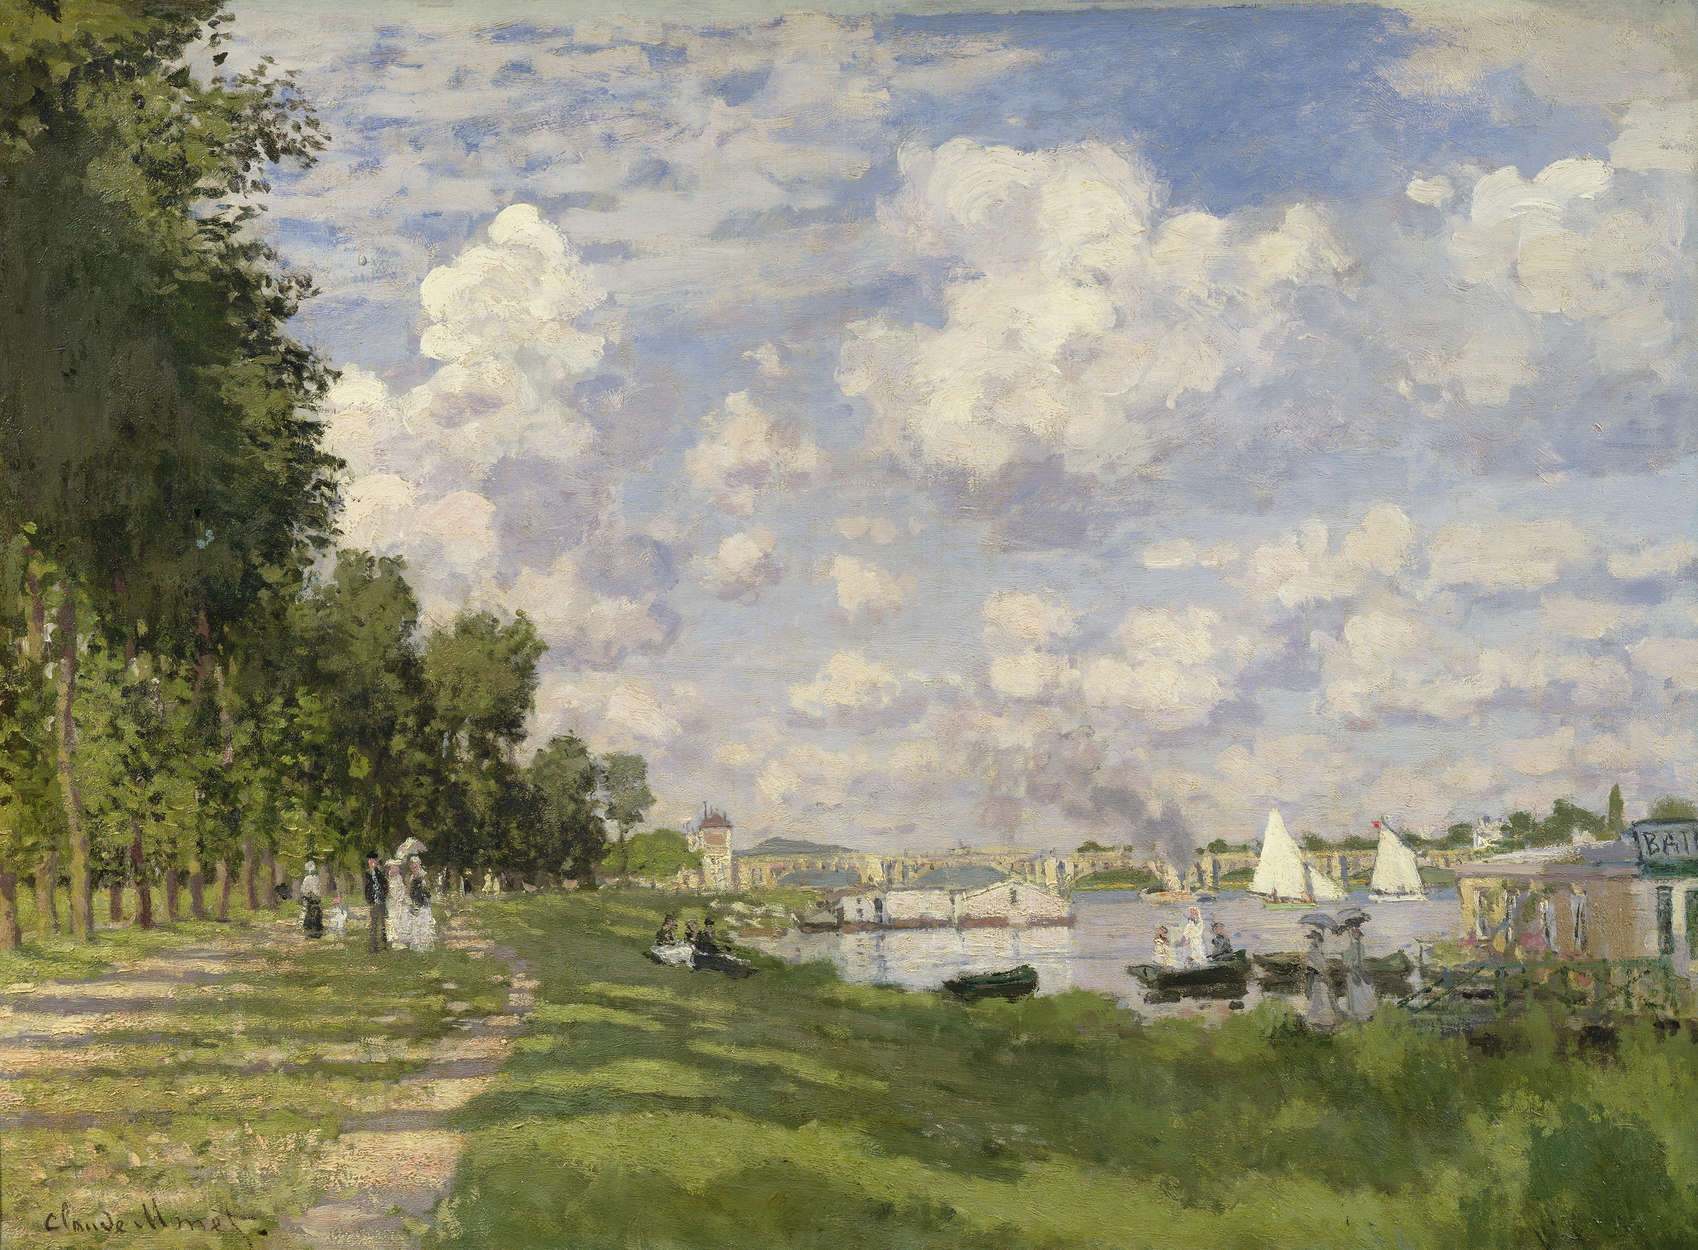             Photo wallpaper "The marina of Argenteuil" by Claude Monet
        